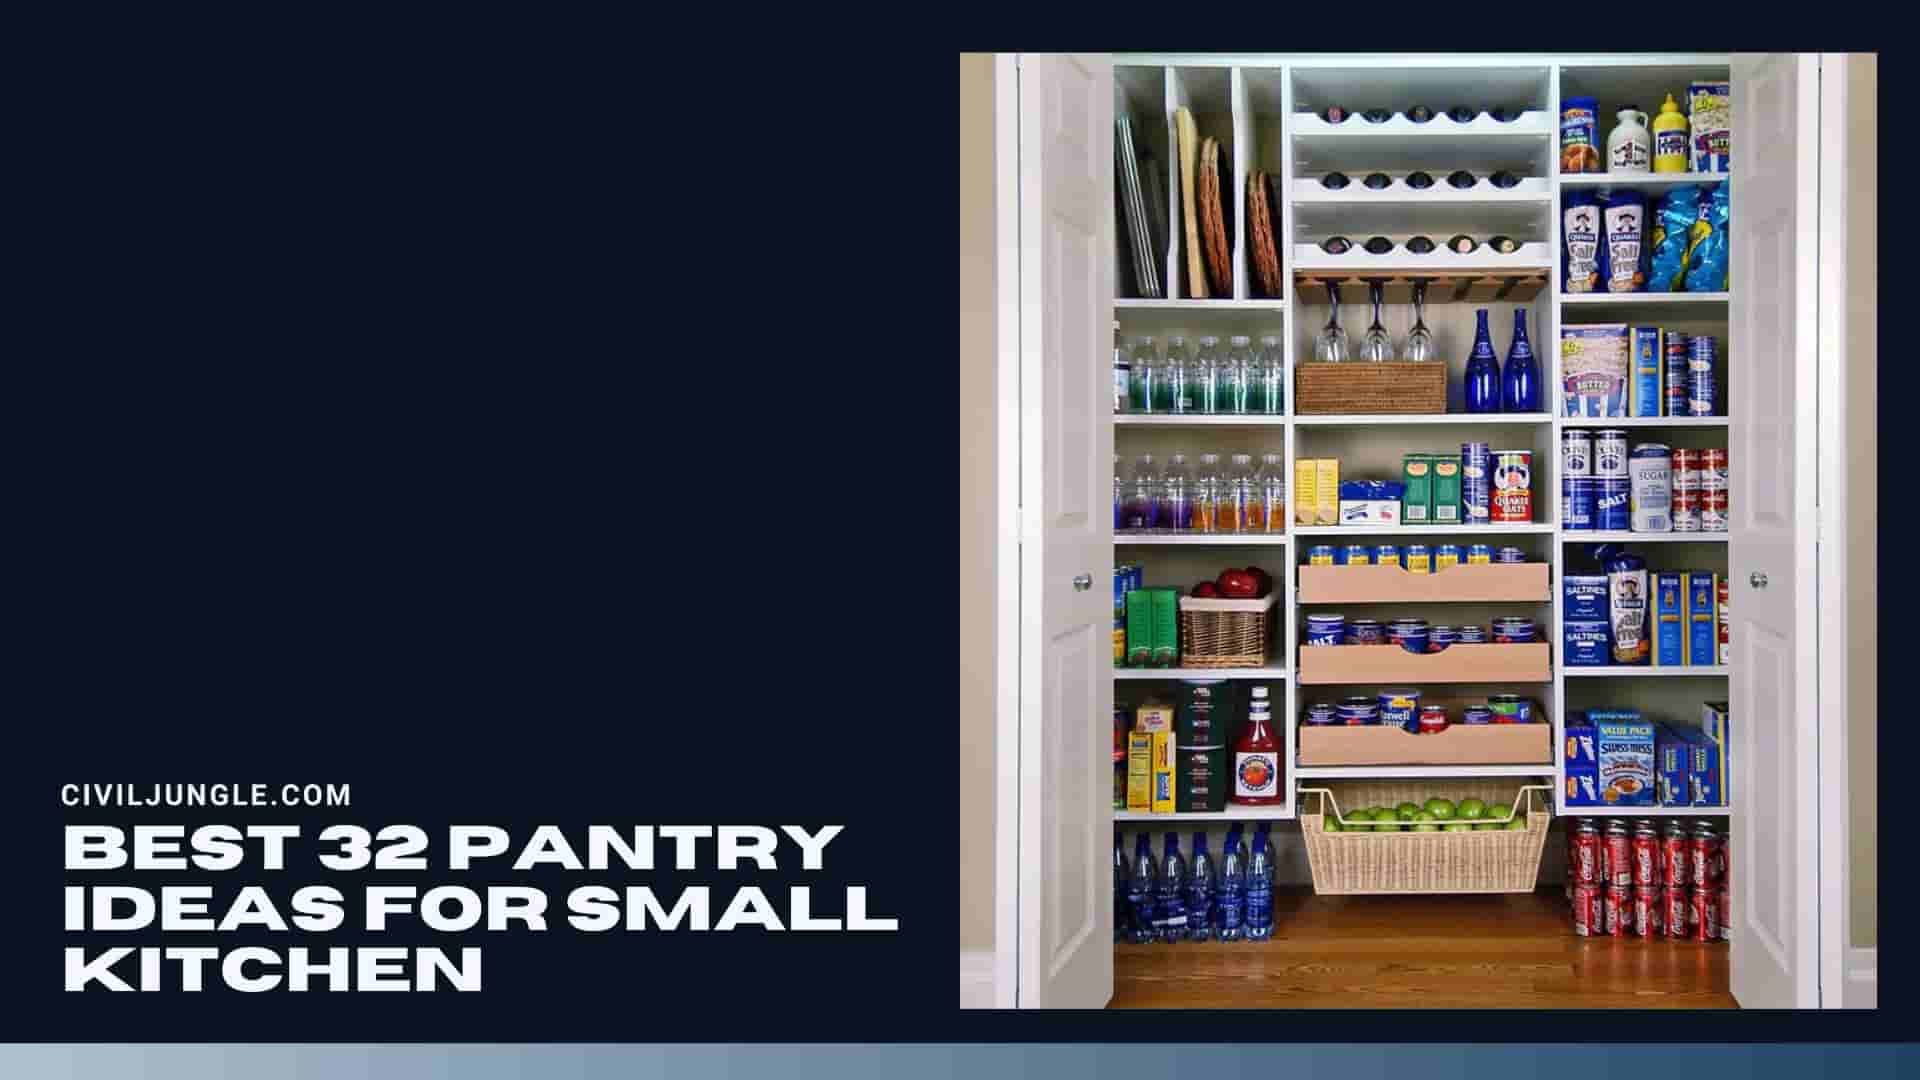 Best 32 Pantry Ideas for Small Kitchen